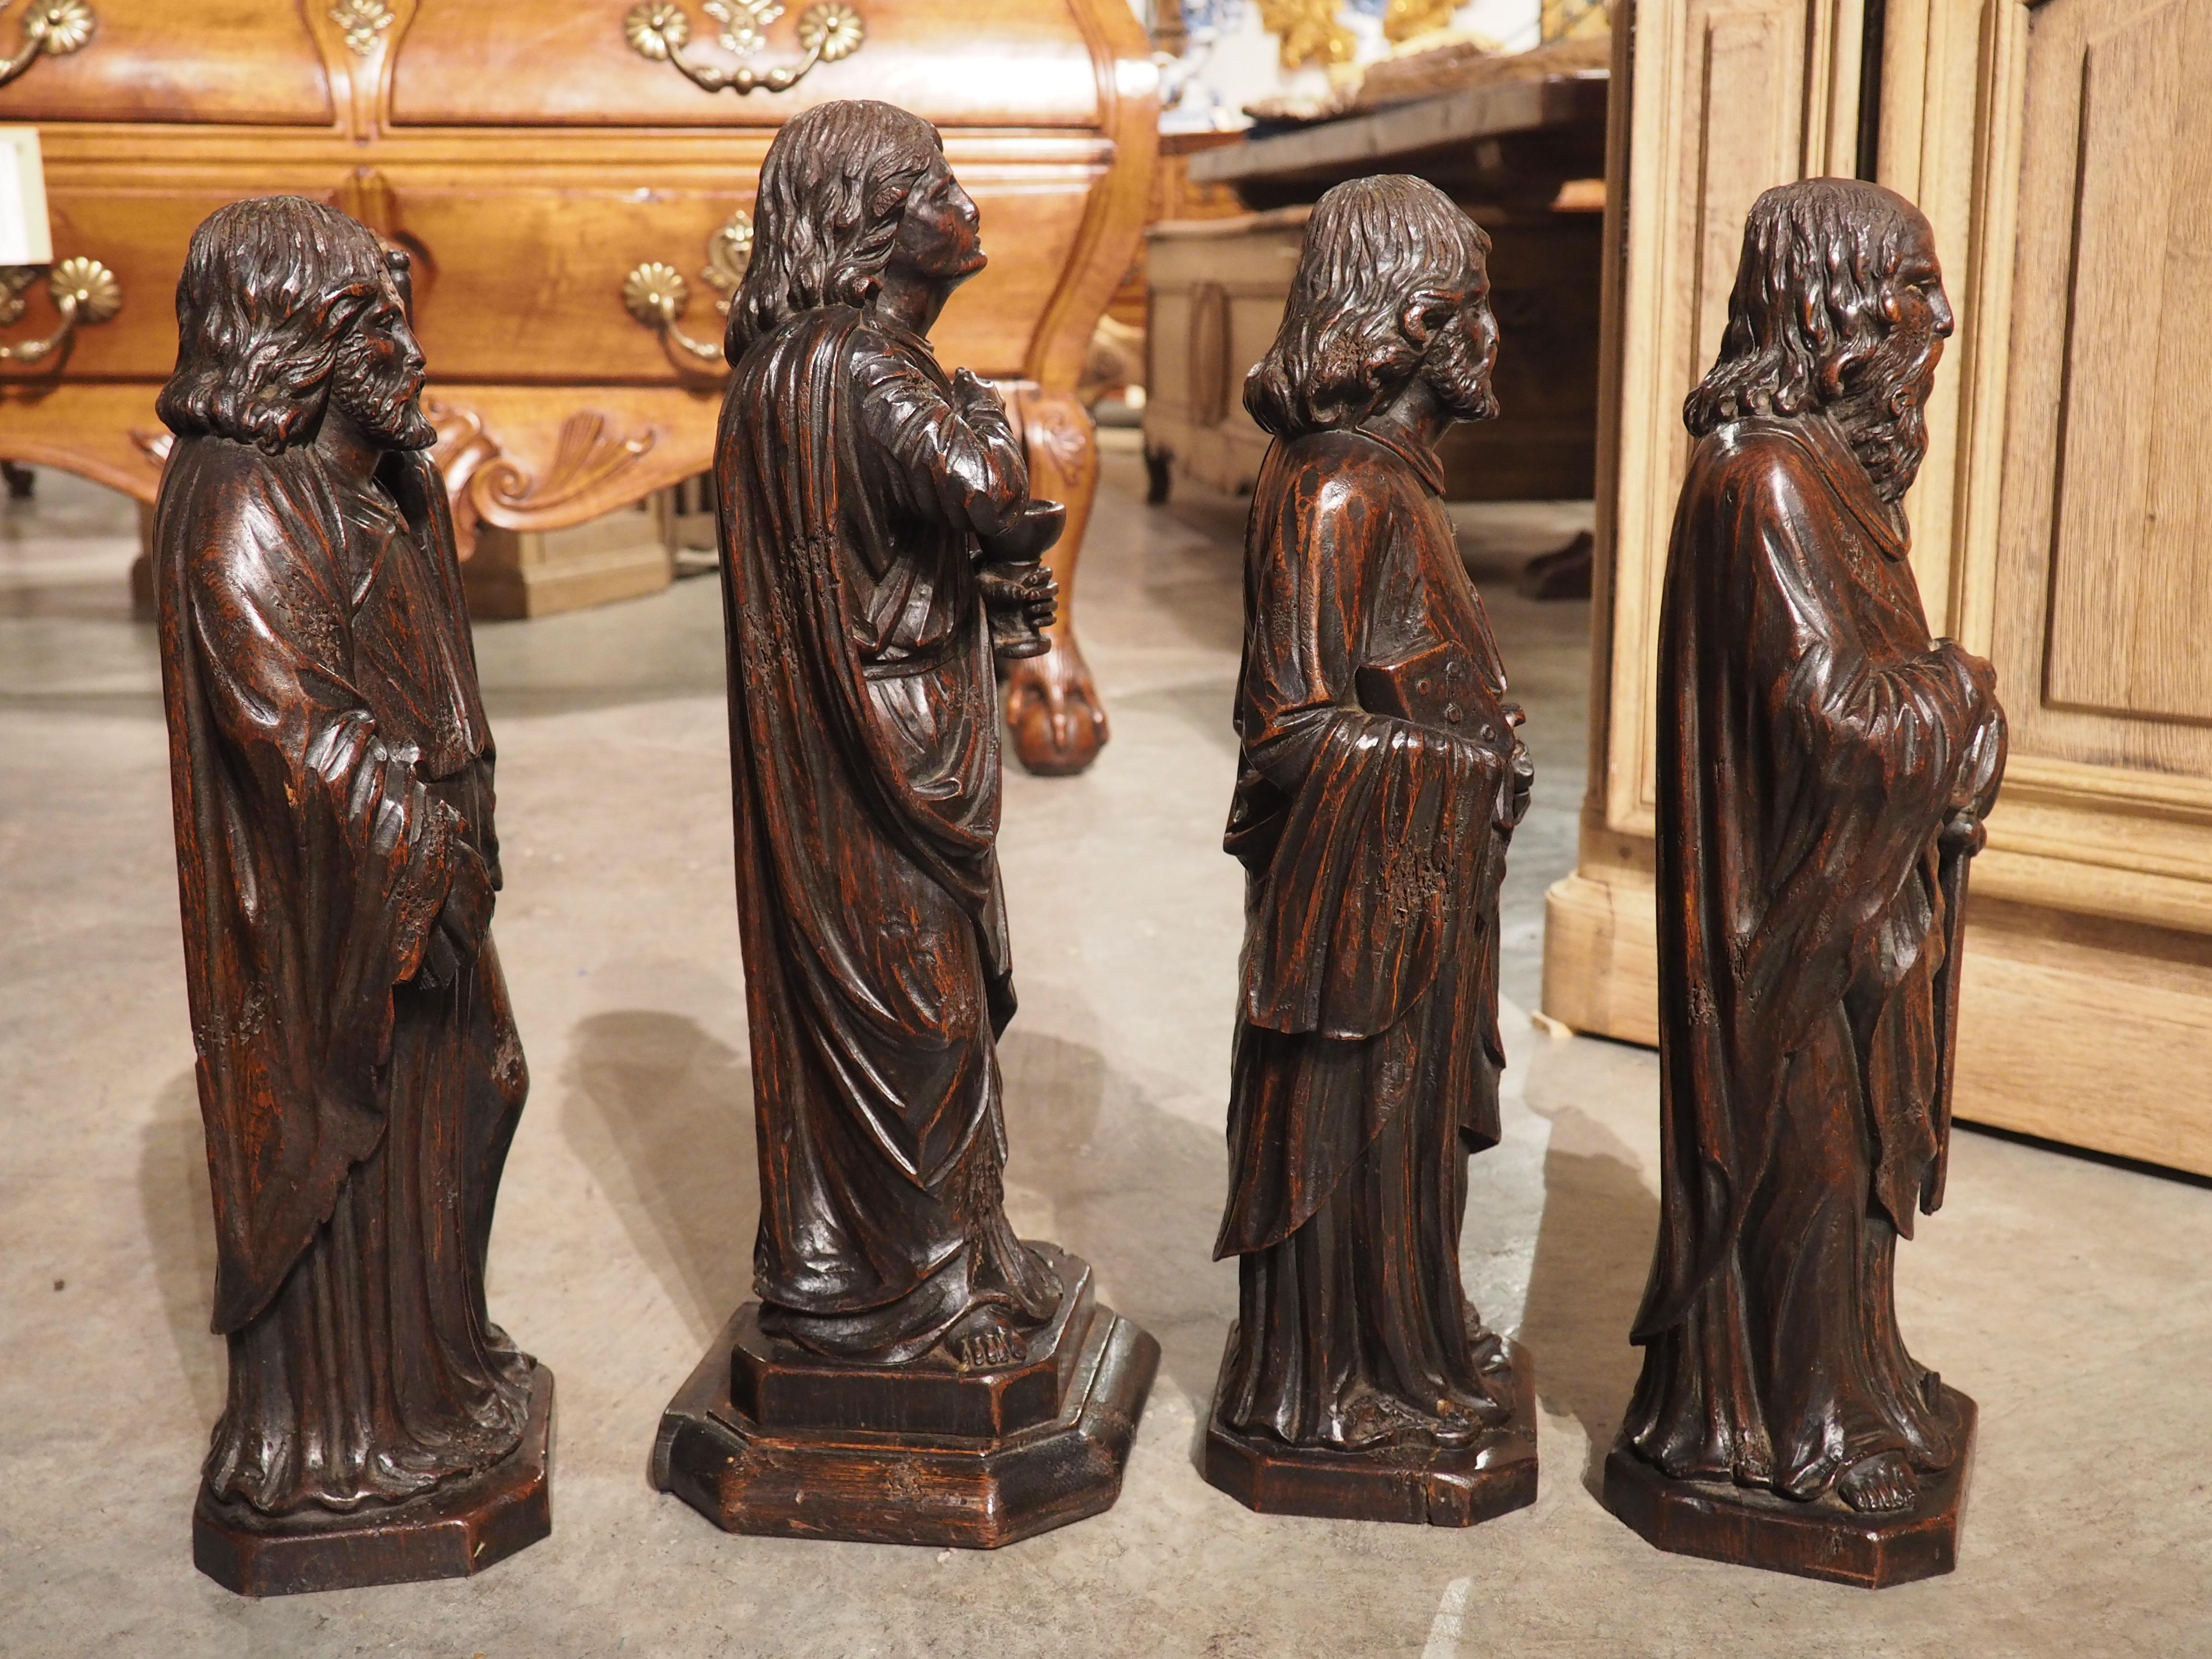 Circa 1800 Carved Oak Sculptures of the Apostles, James, John, Peter, and Paul For Sale 7